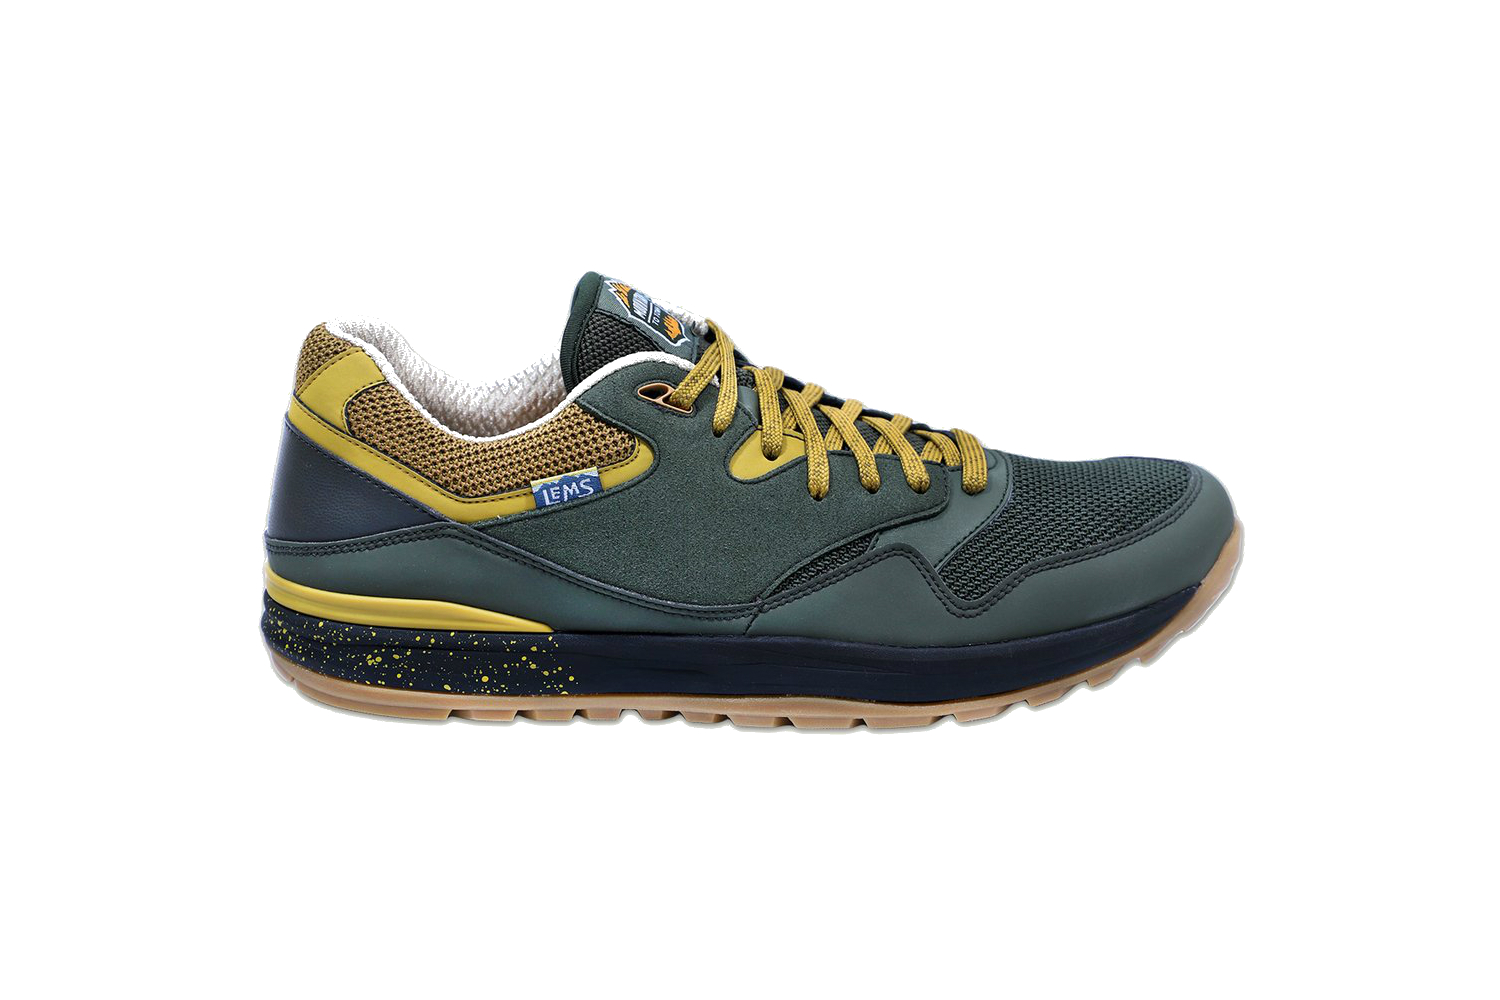 Lems Trailhead Hiking Shoe Is Just as at Home on the Trail as It Is at ...